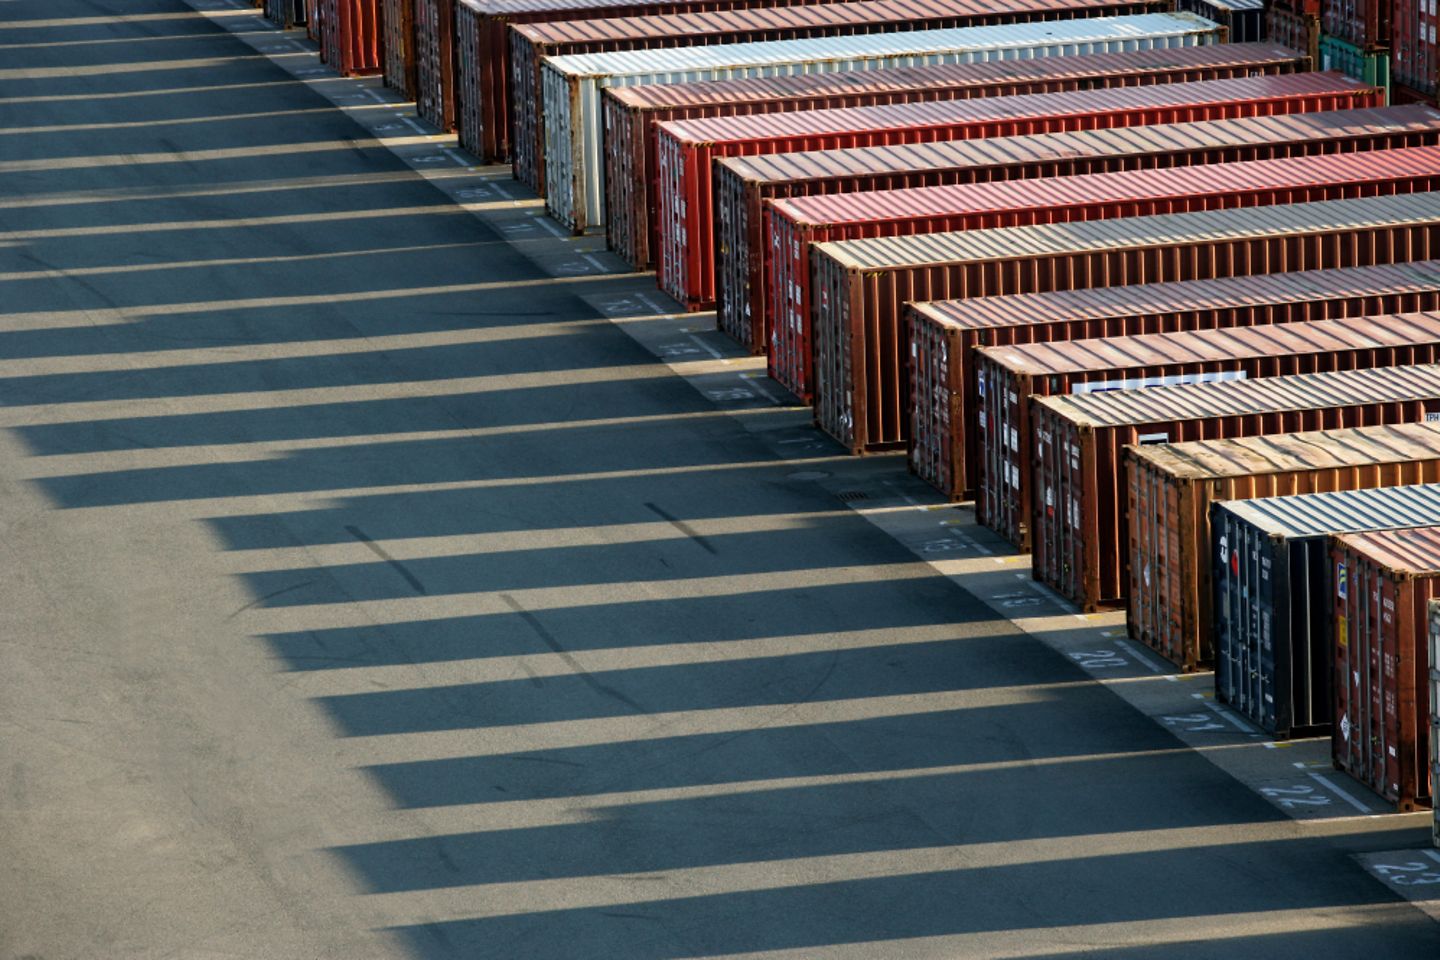 Containers in a row